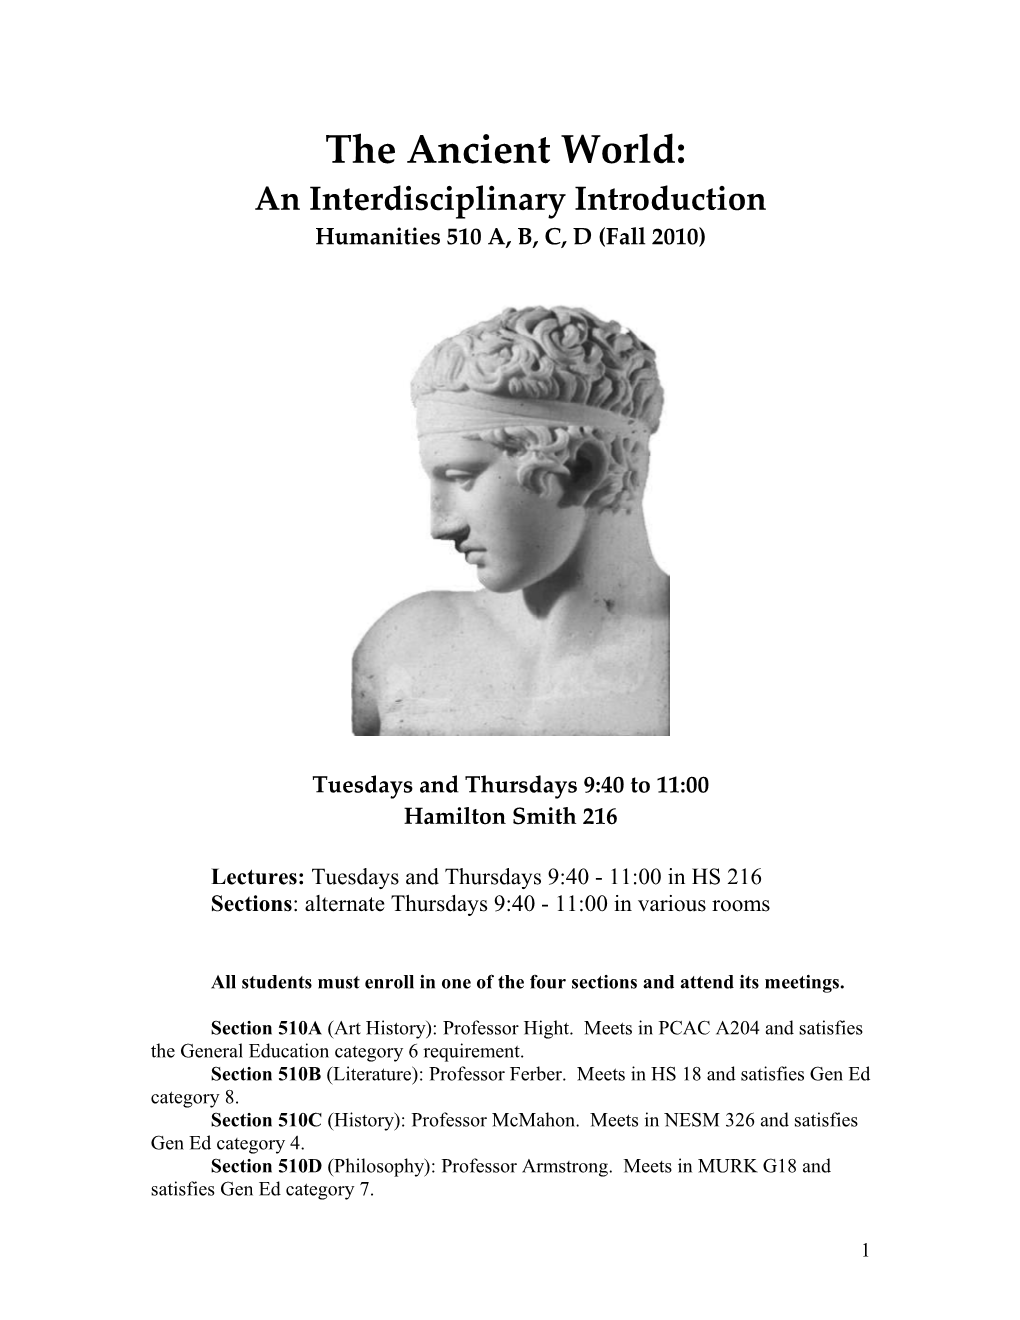 The Ancient World: an Interdisciplinary Introduction